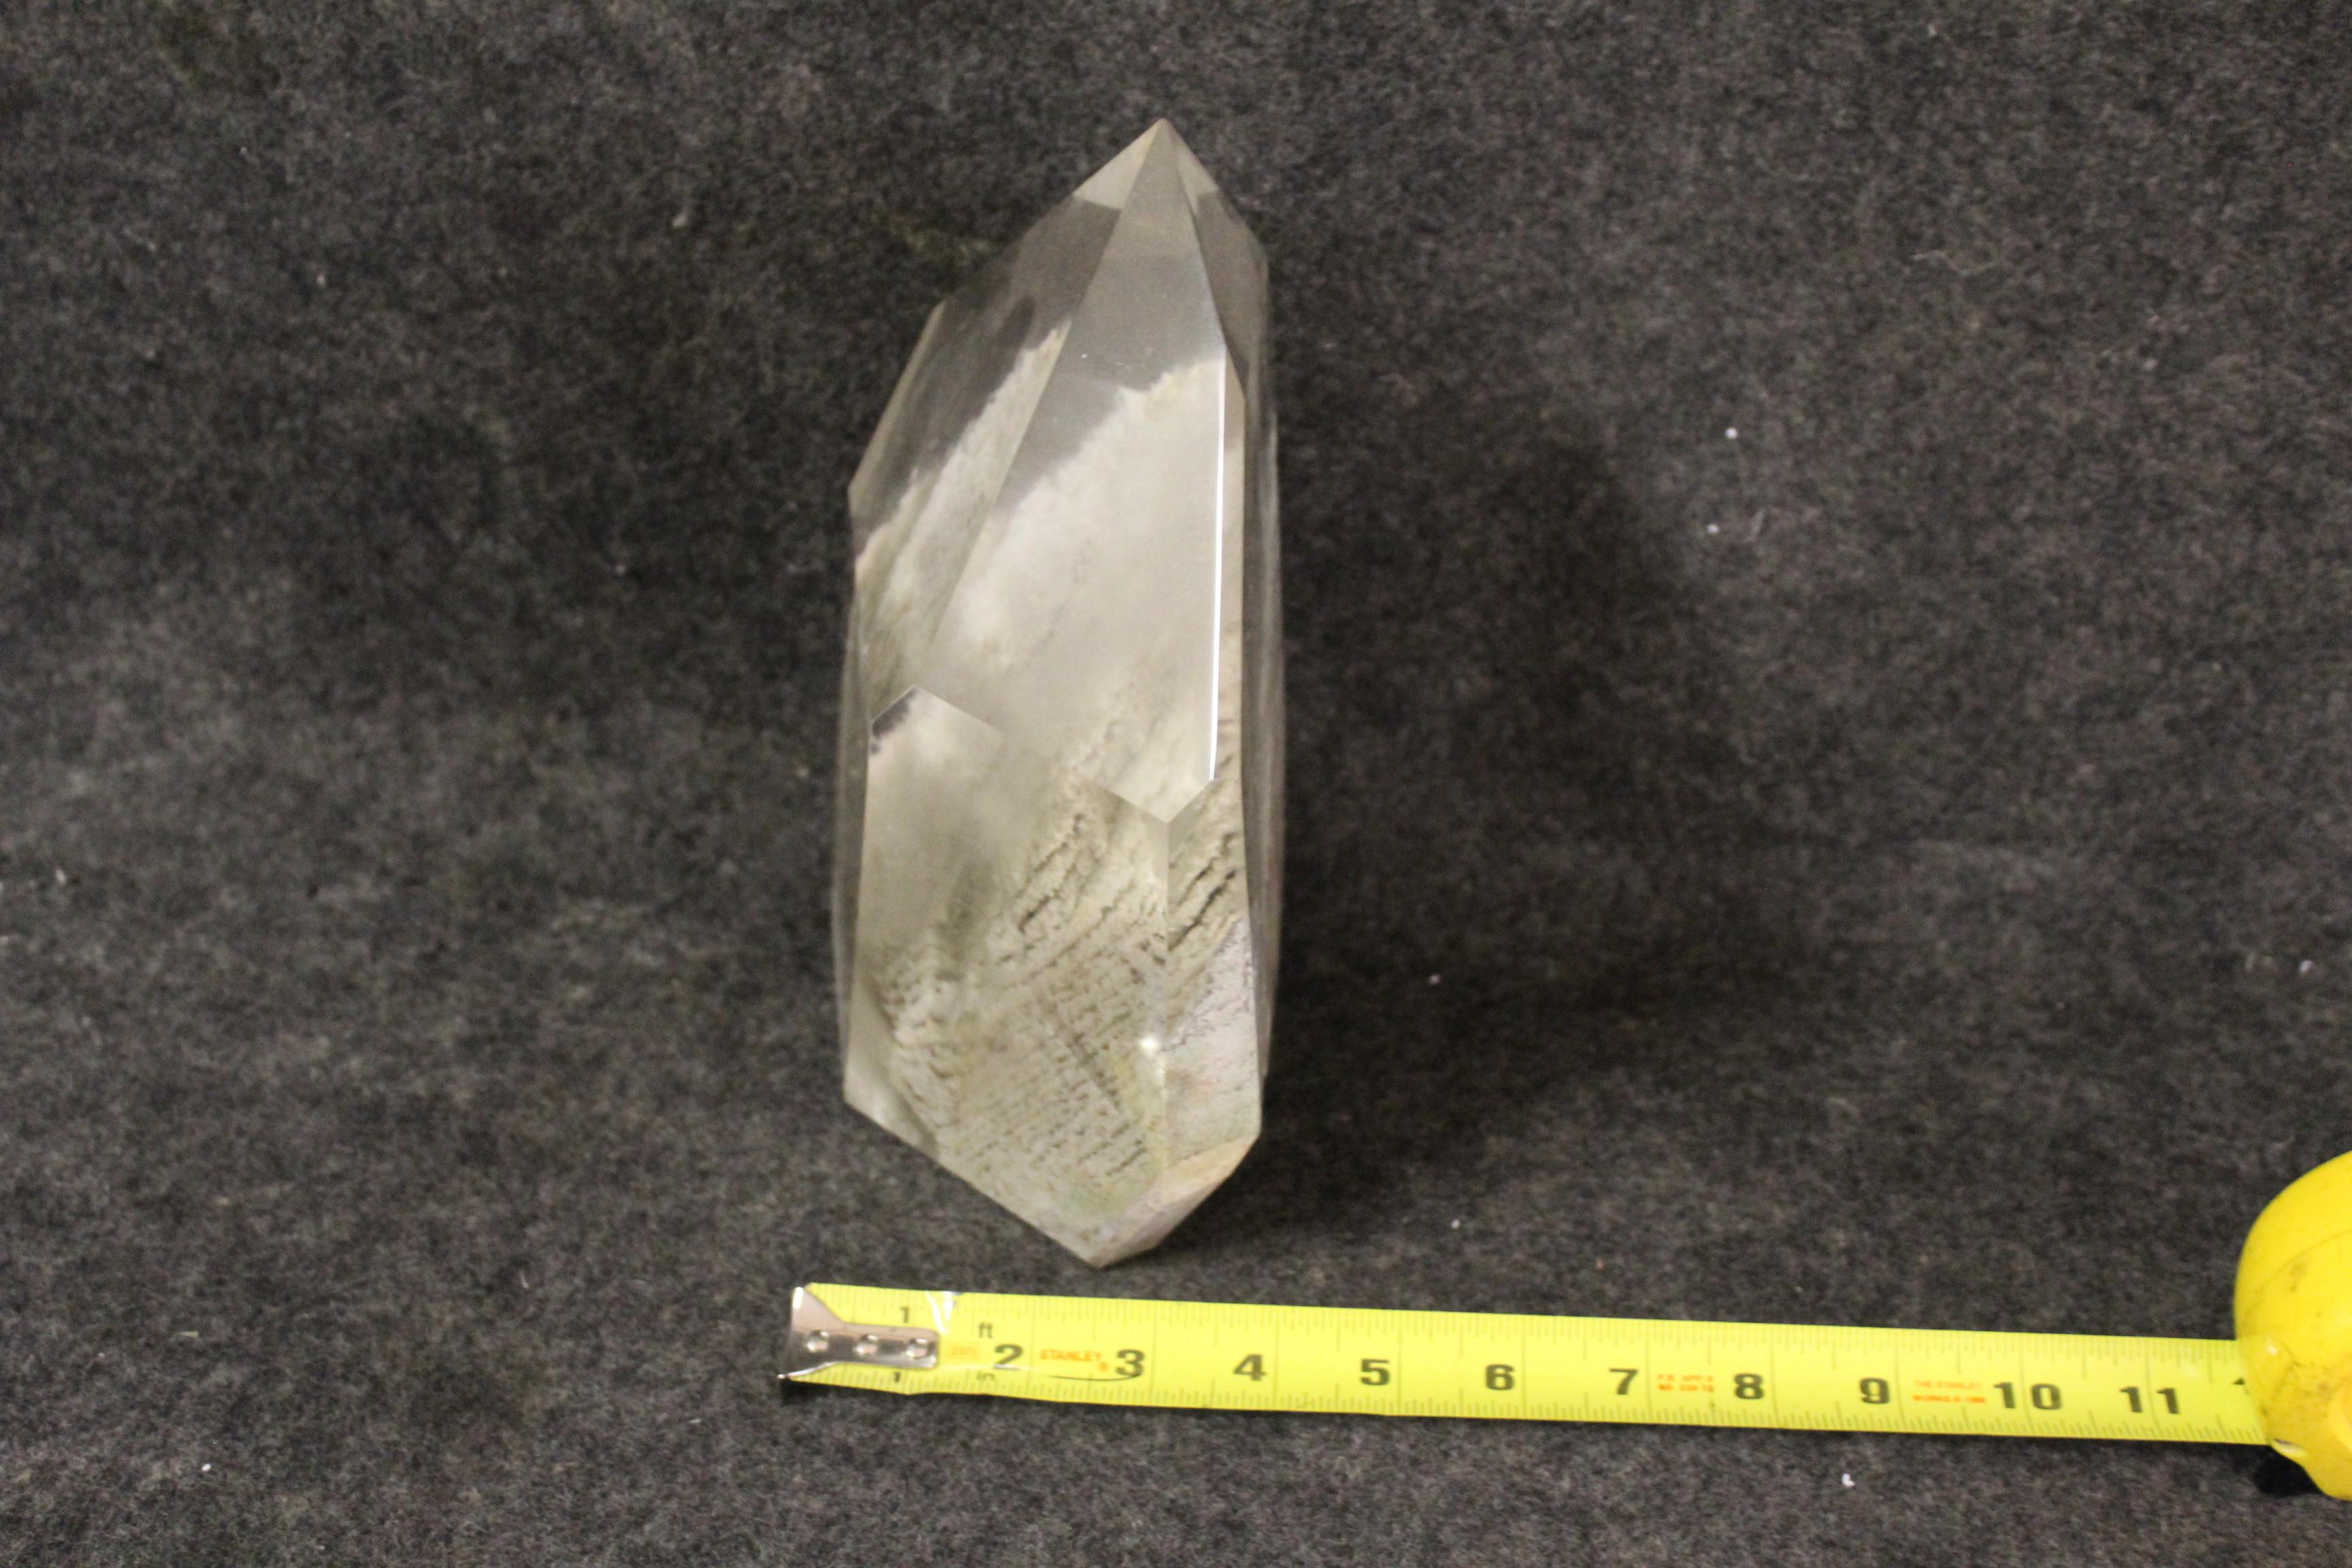 Brazilian Quartz Crystal Collectible Pt, Special Internal Striations of Another Stone For Sale